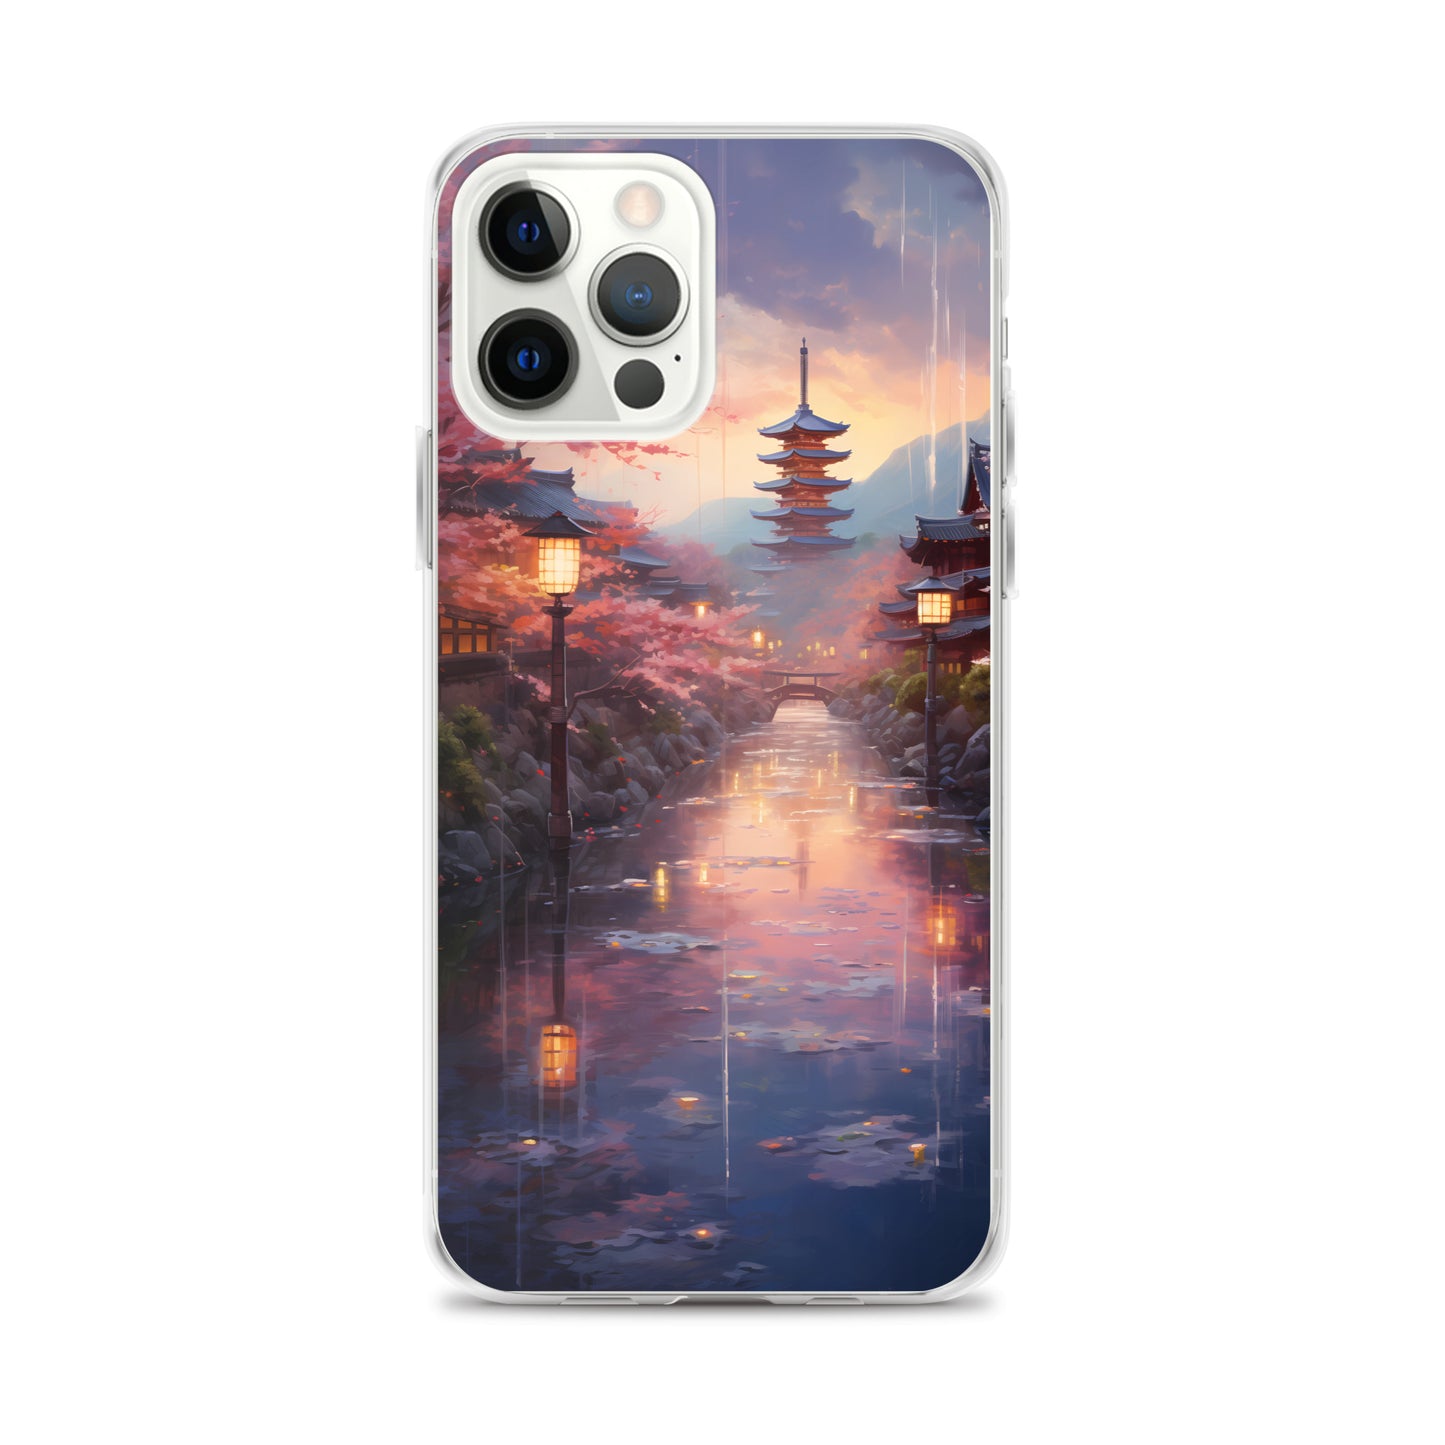 iPhone Case - Kyoto Cherry Blossoms